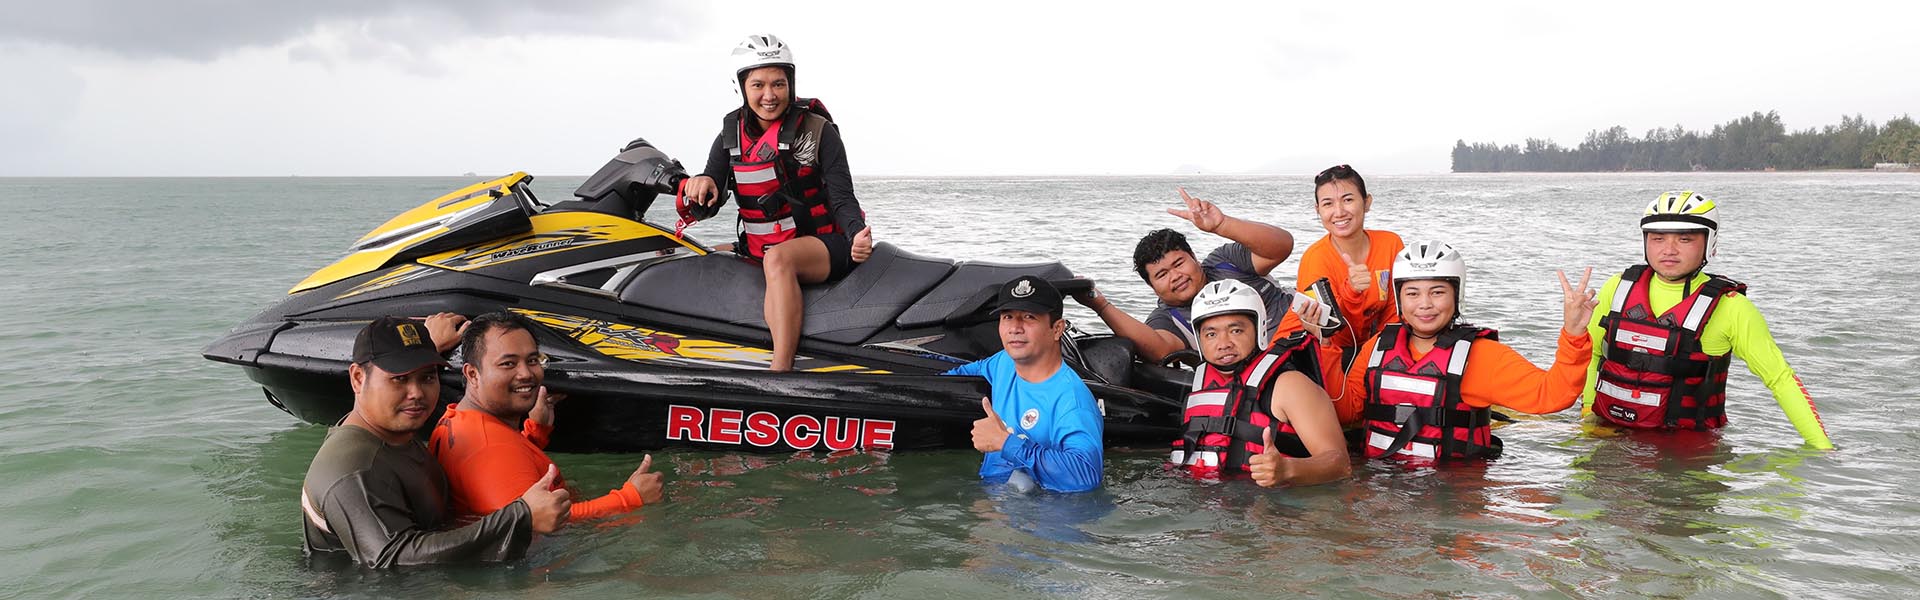 LifeSled Water Rescue Board Testimonials